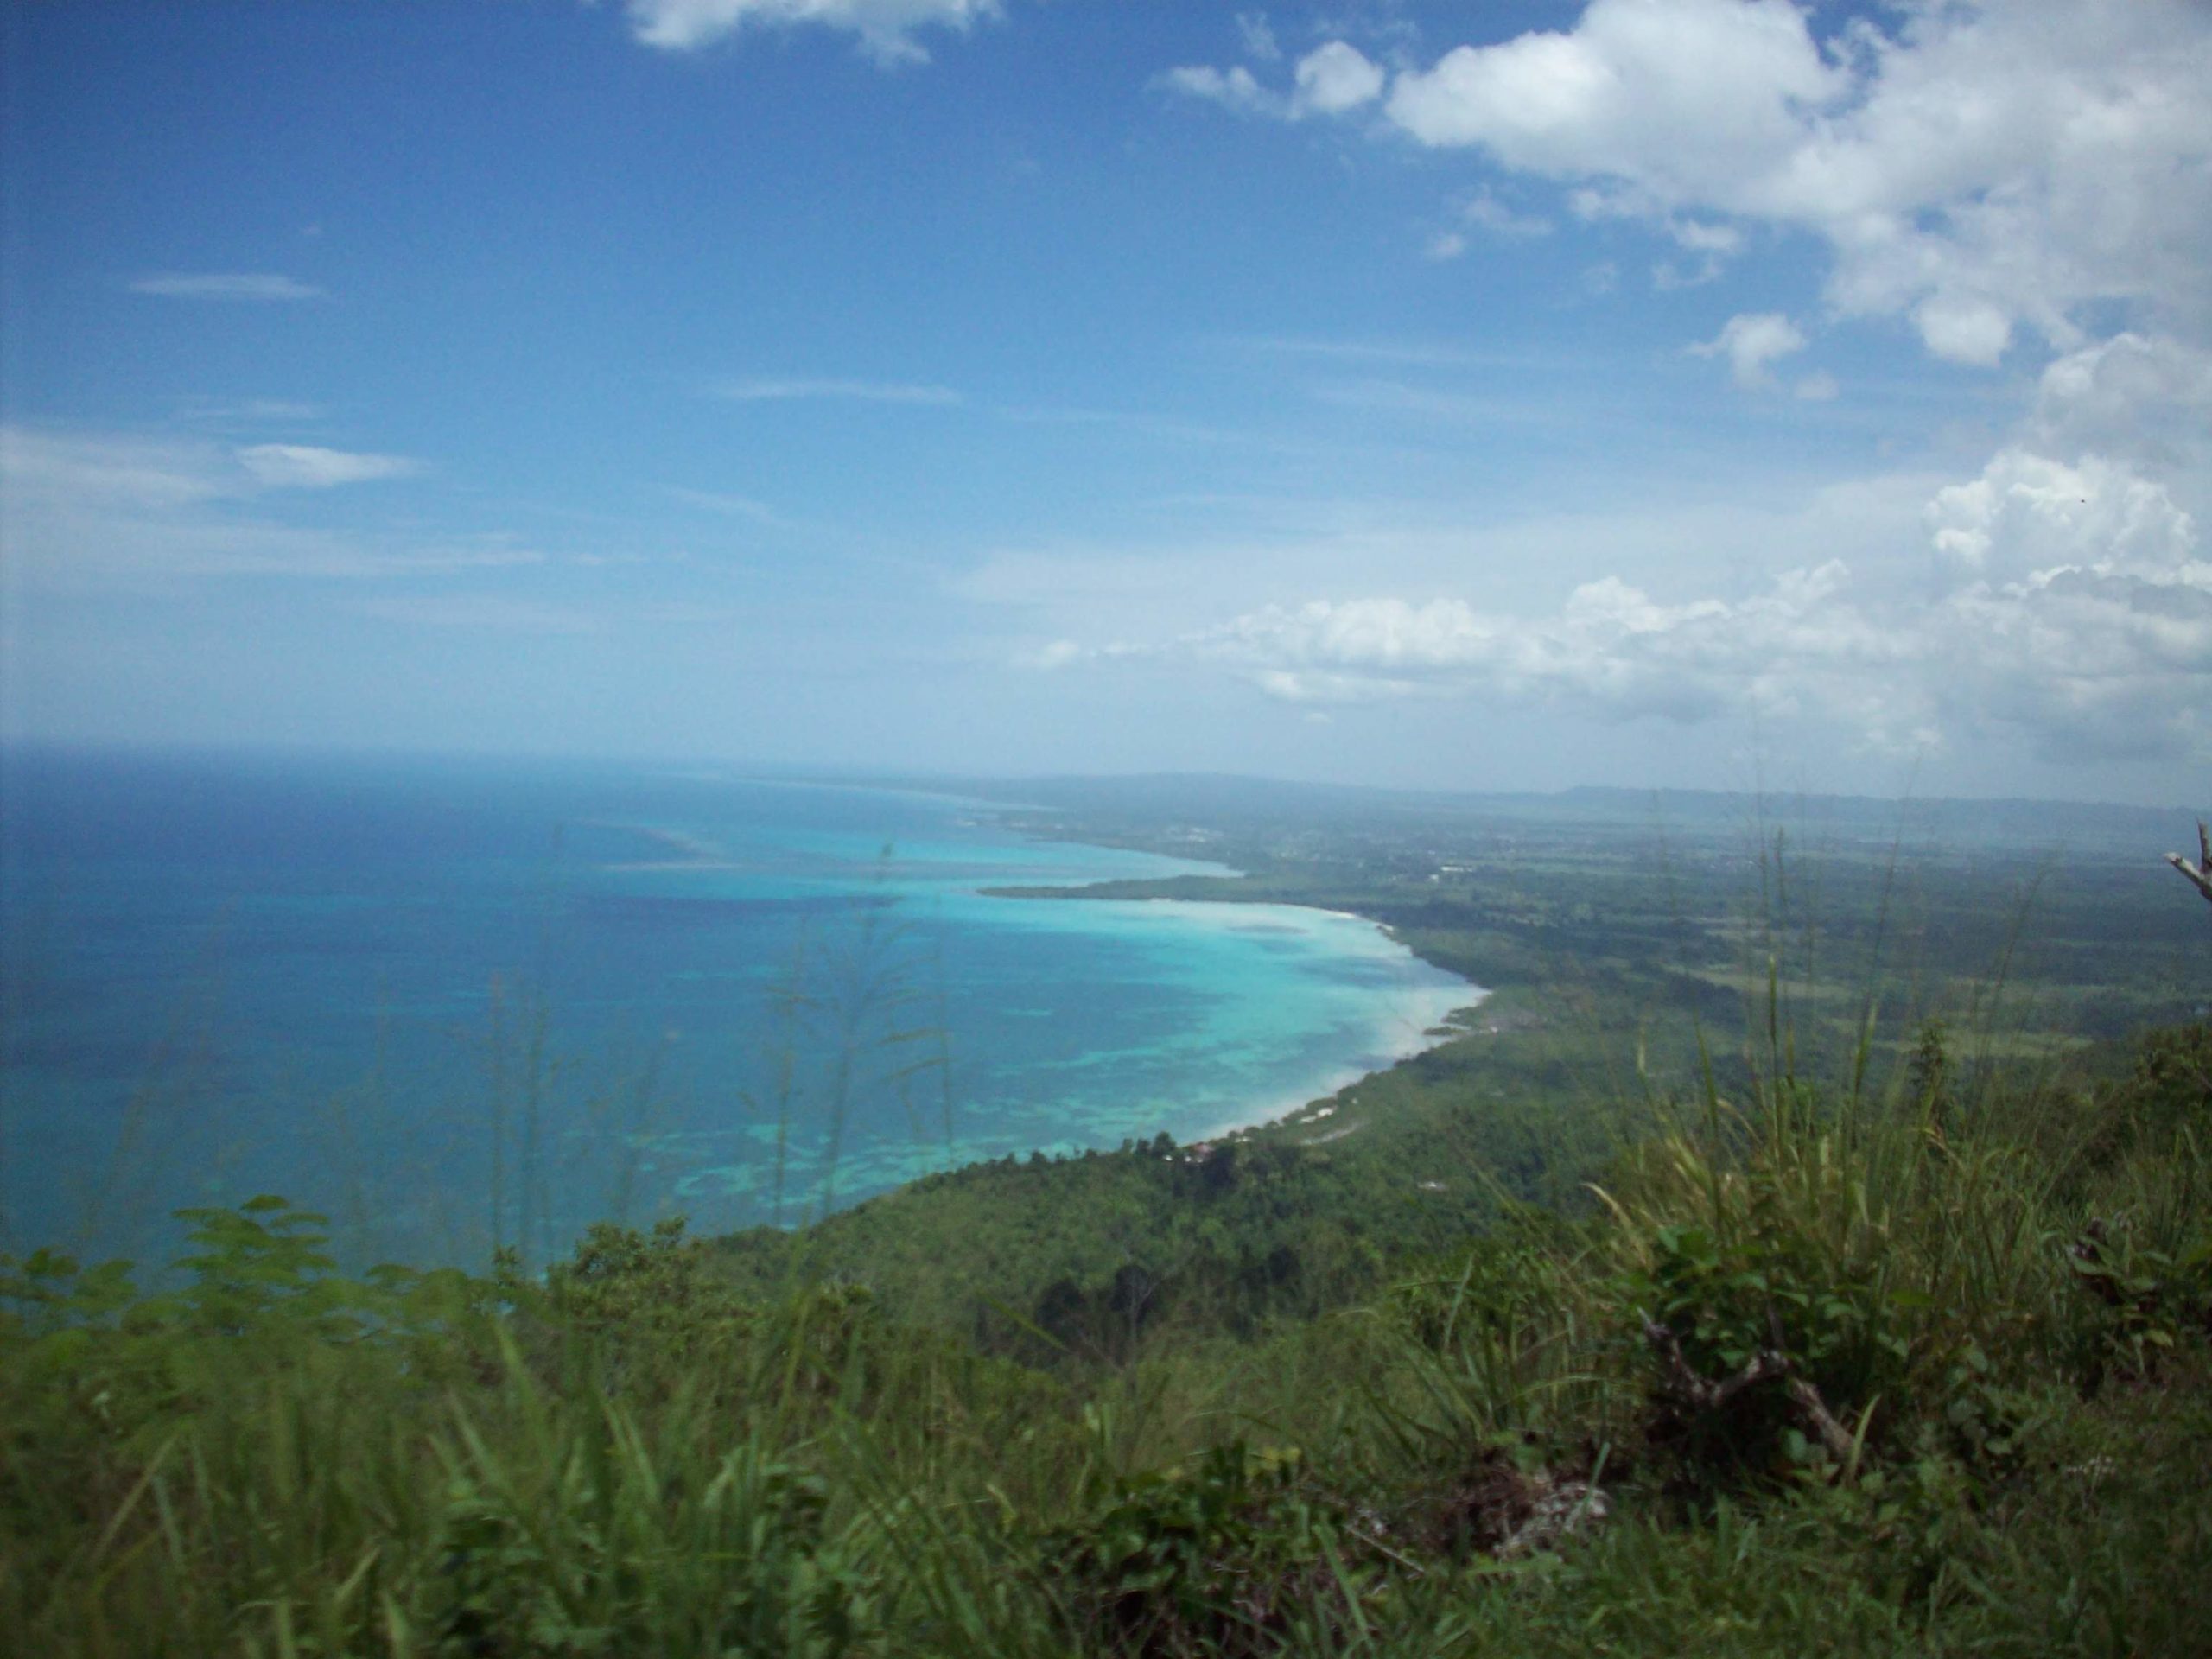 A beautiful panoramic mountain view of where the ocean meets the green shore.